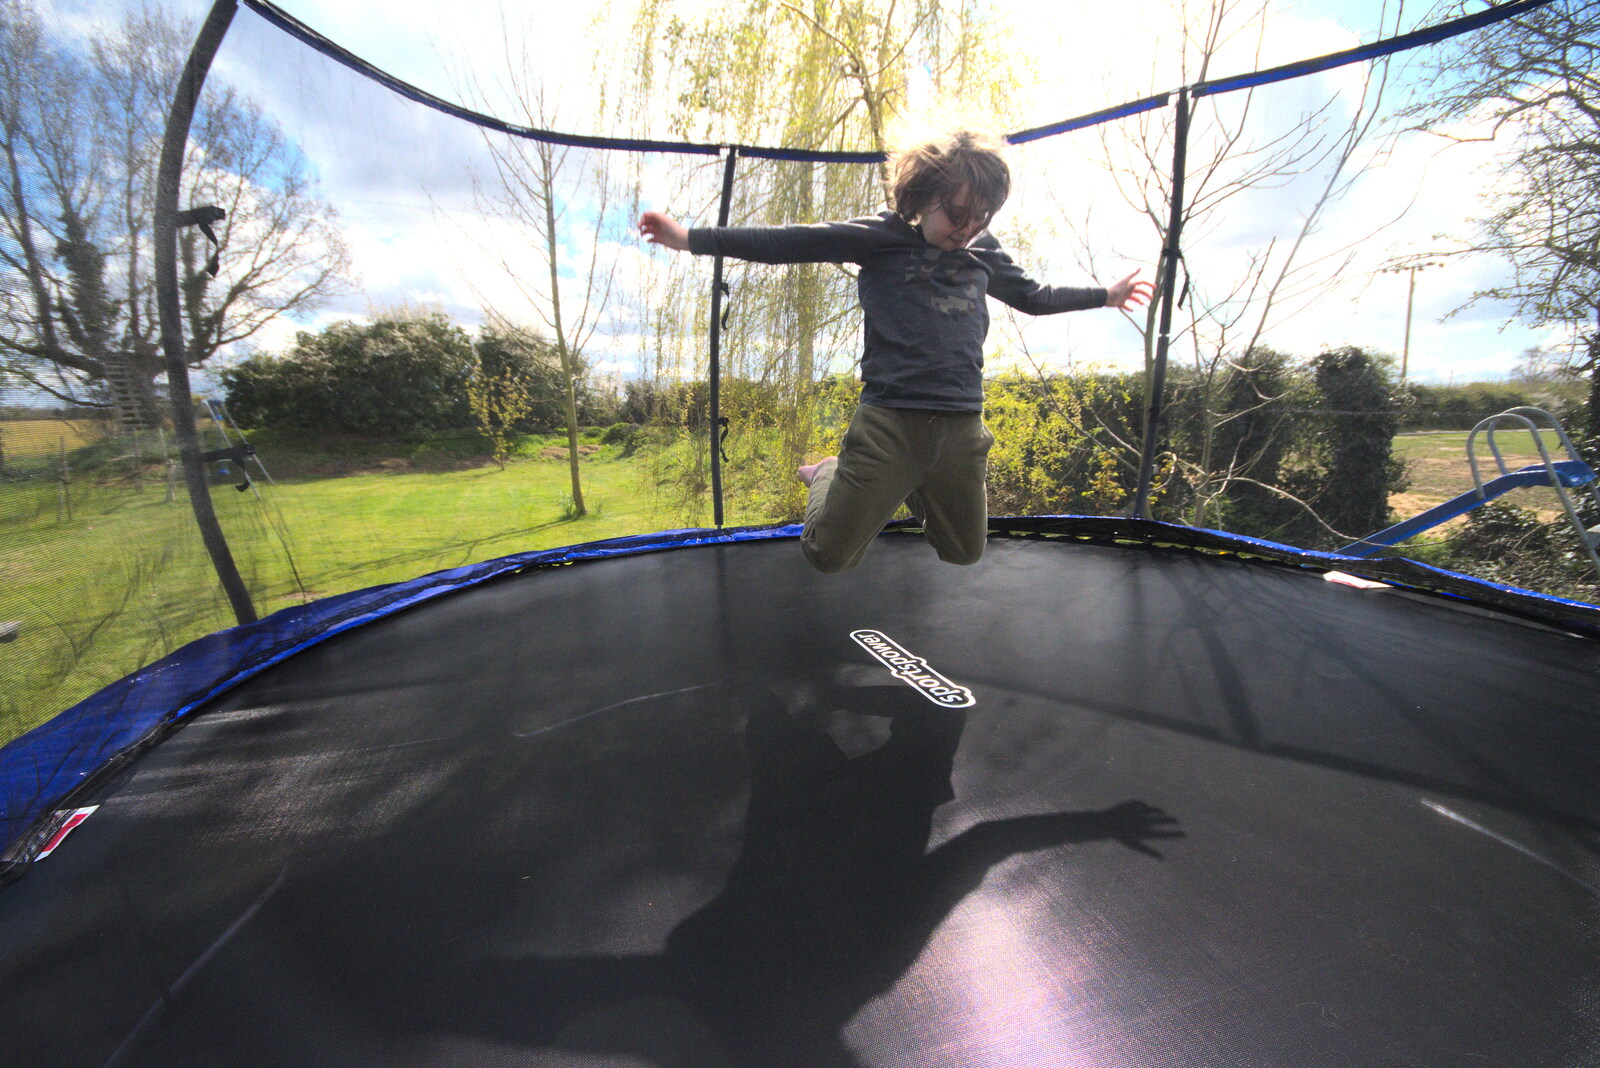 Fred in mid air from Roadworks and Harry's Trampoline, Brome, Suffolk - 6th April 2021